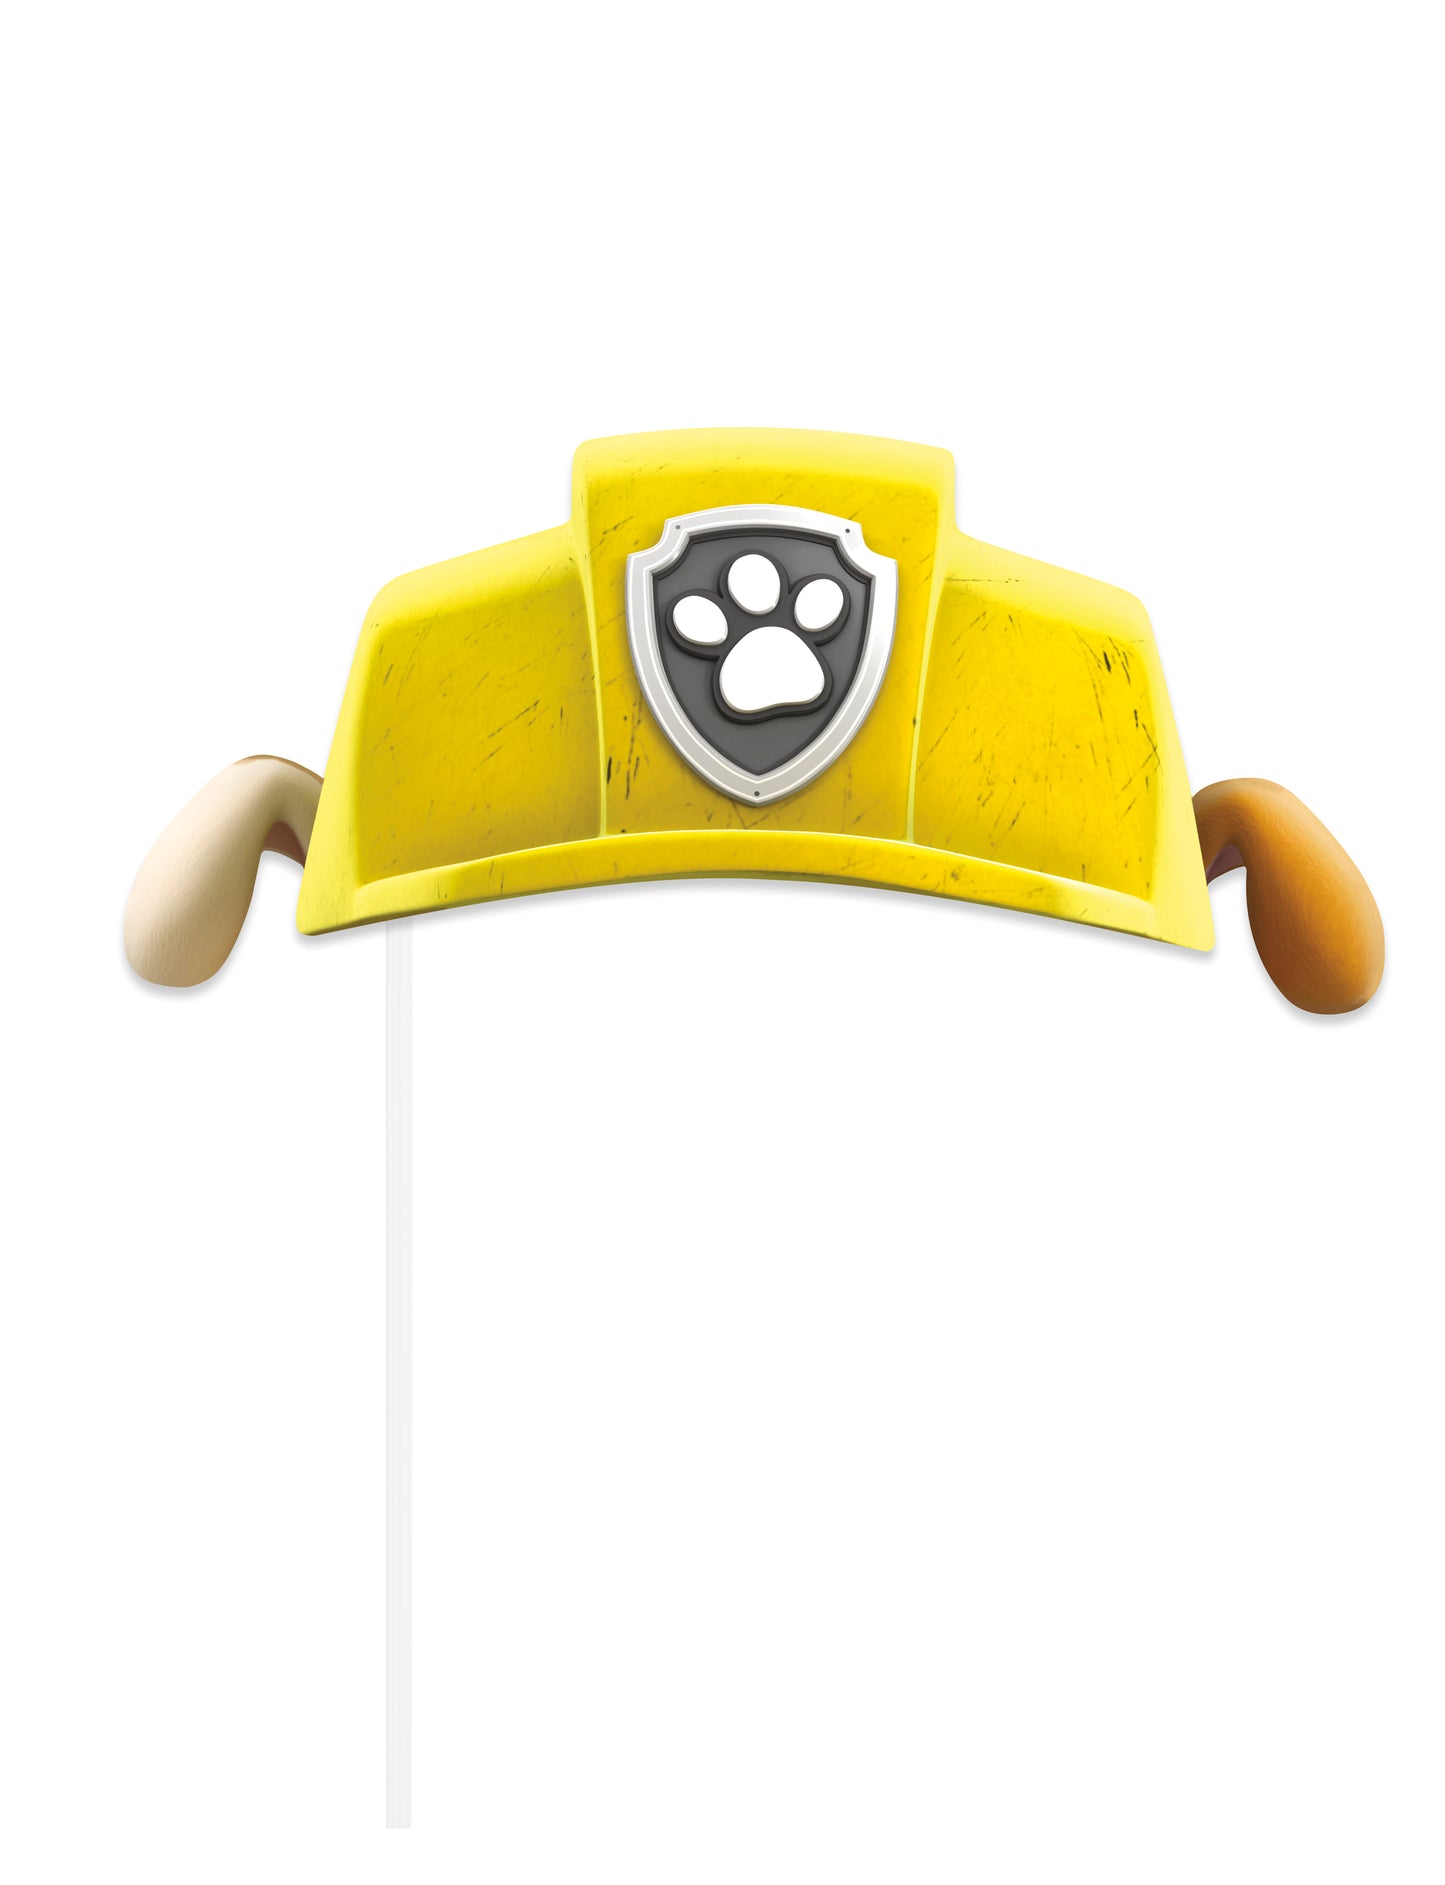 Paw Patrol Photo Booth Props, 8-pc